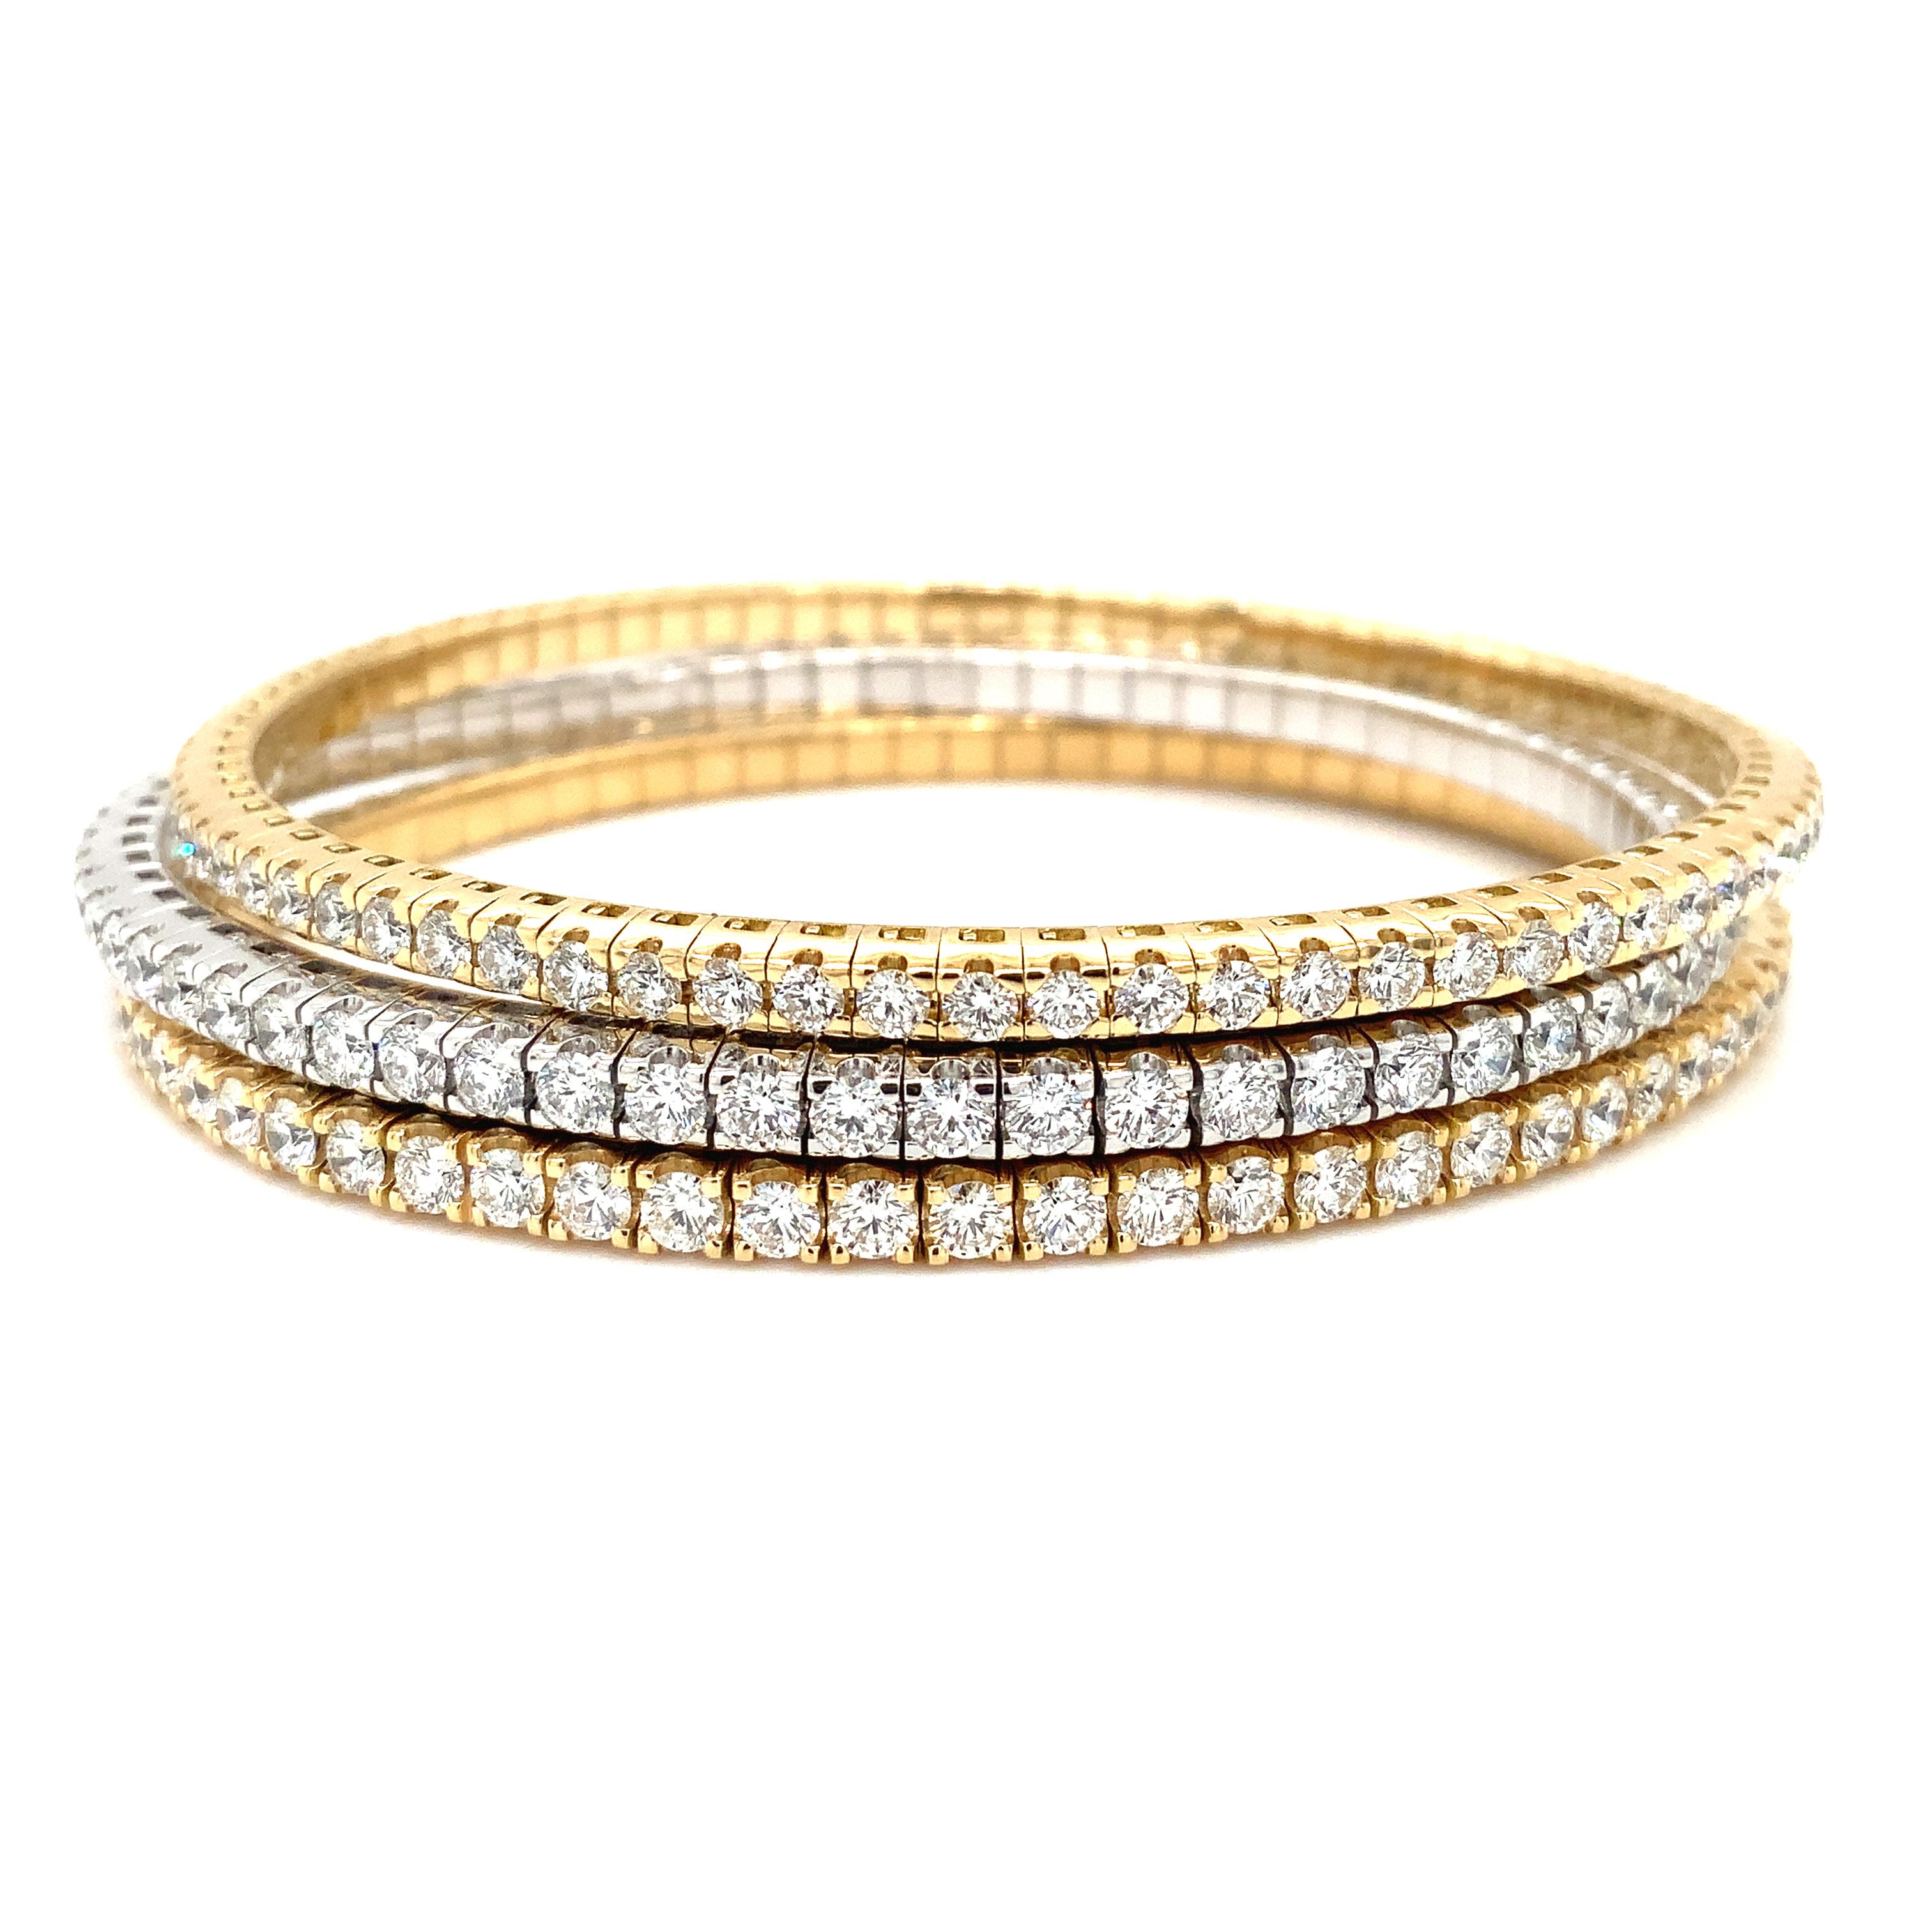 A Link Collection Classic Stretchy Diamond Bracelet 2.61ct Set in 18k Gold In New Condition For Sale In Los Gatos, CA